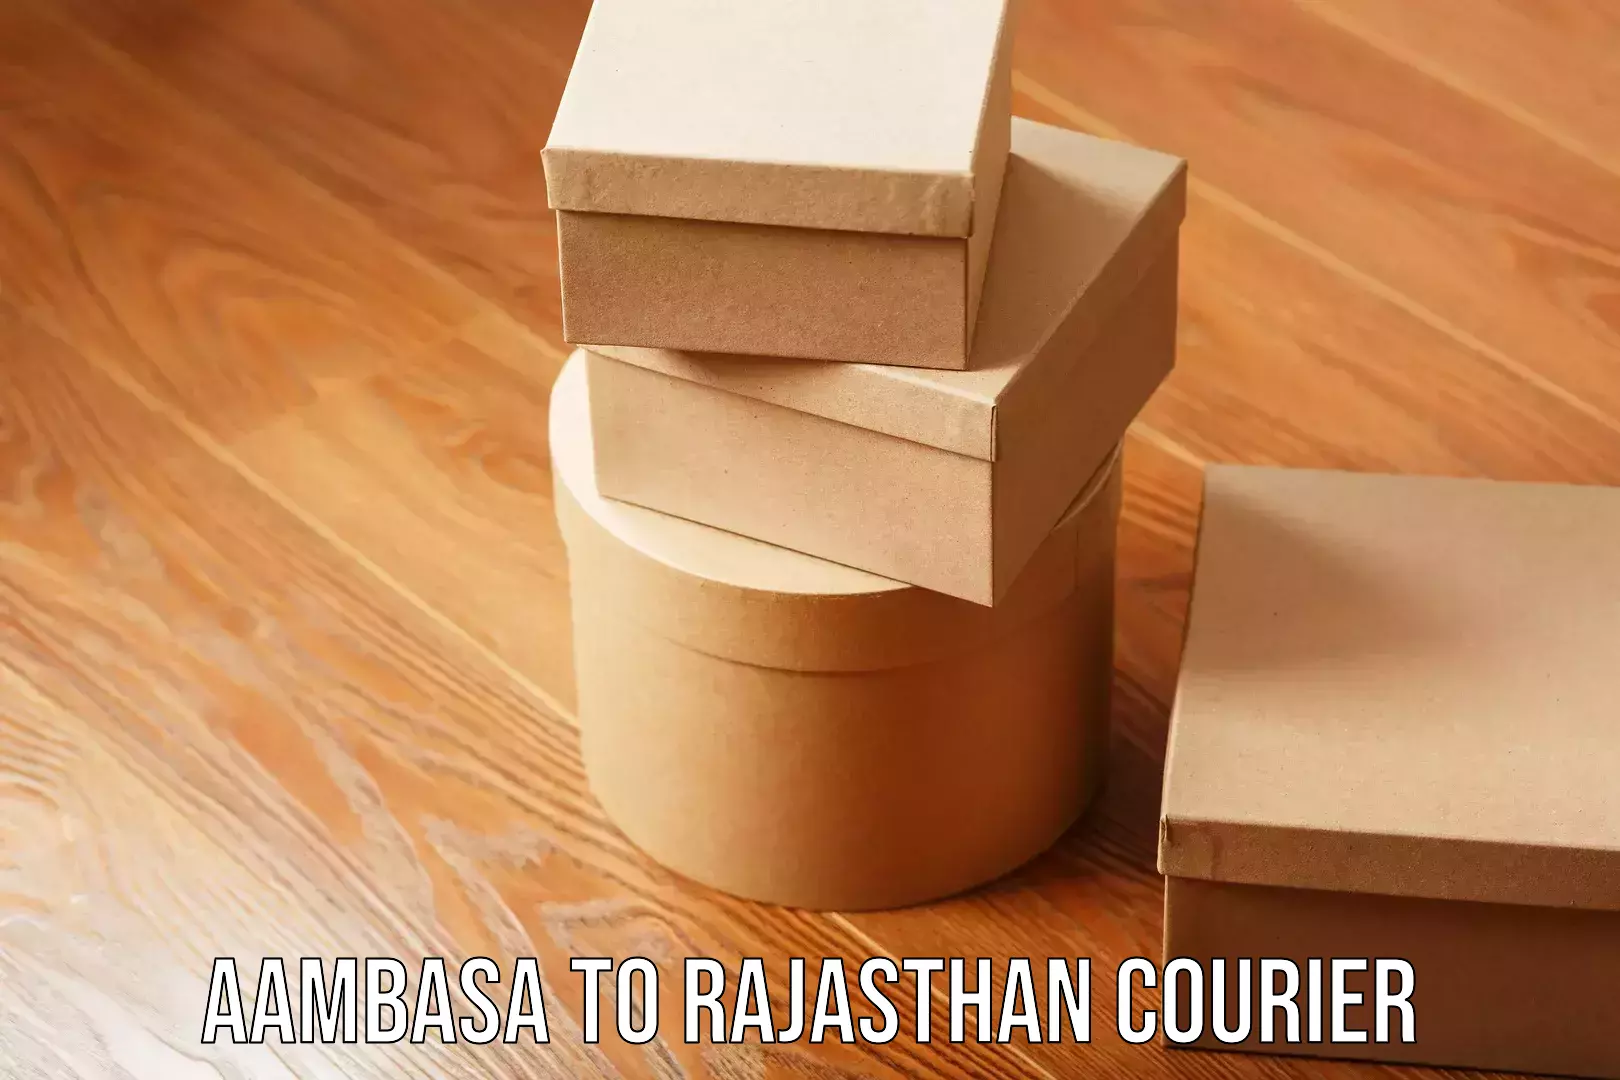 Custom courier packages Aambasa to Rajasthan